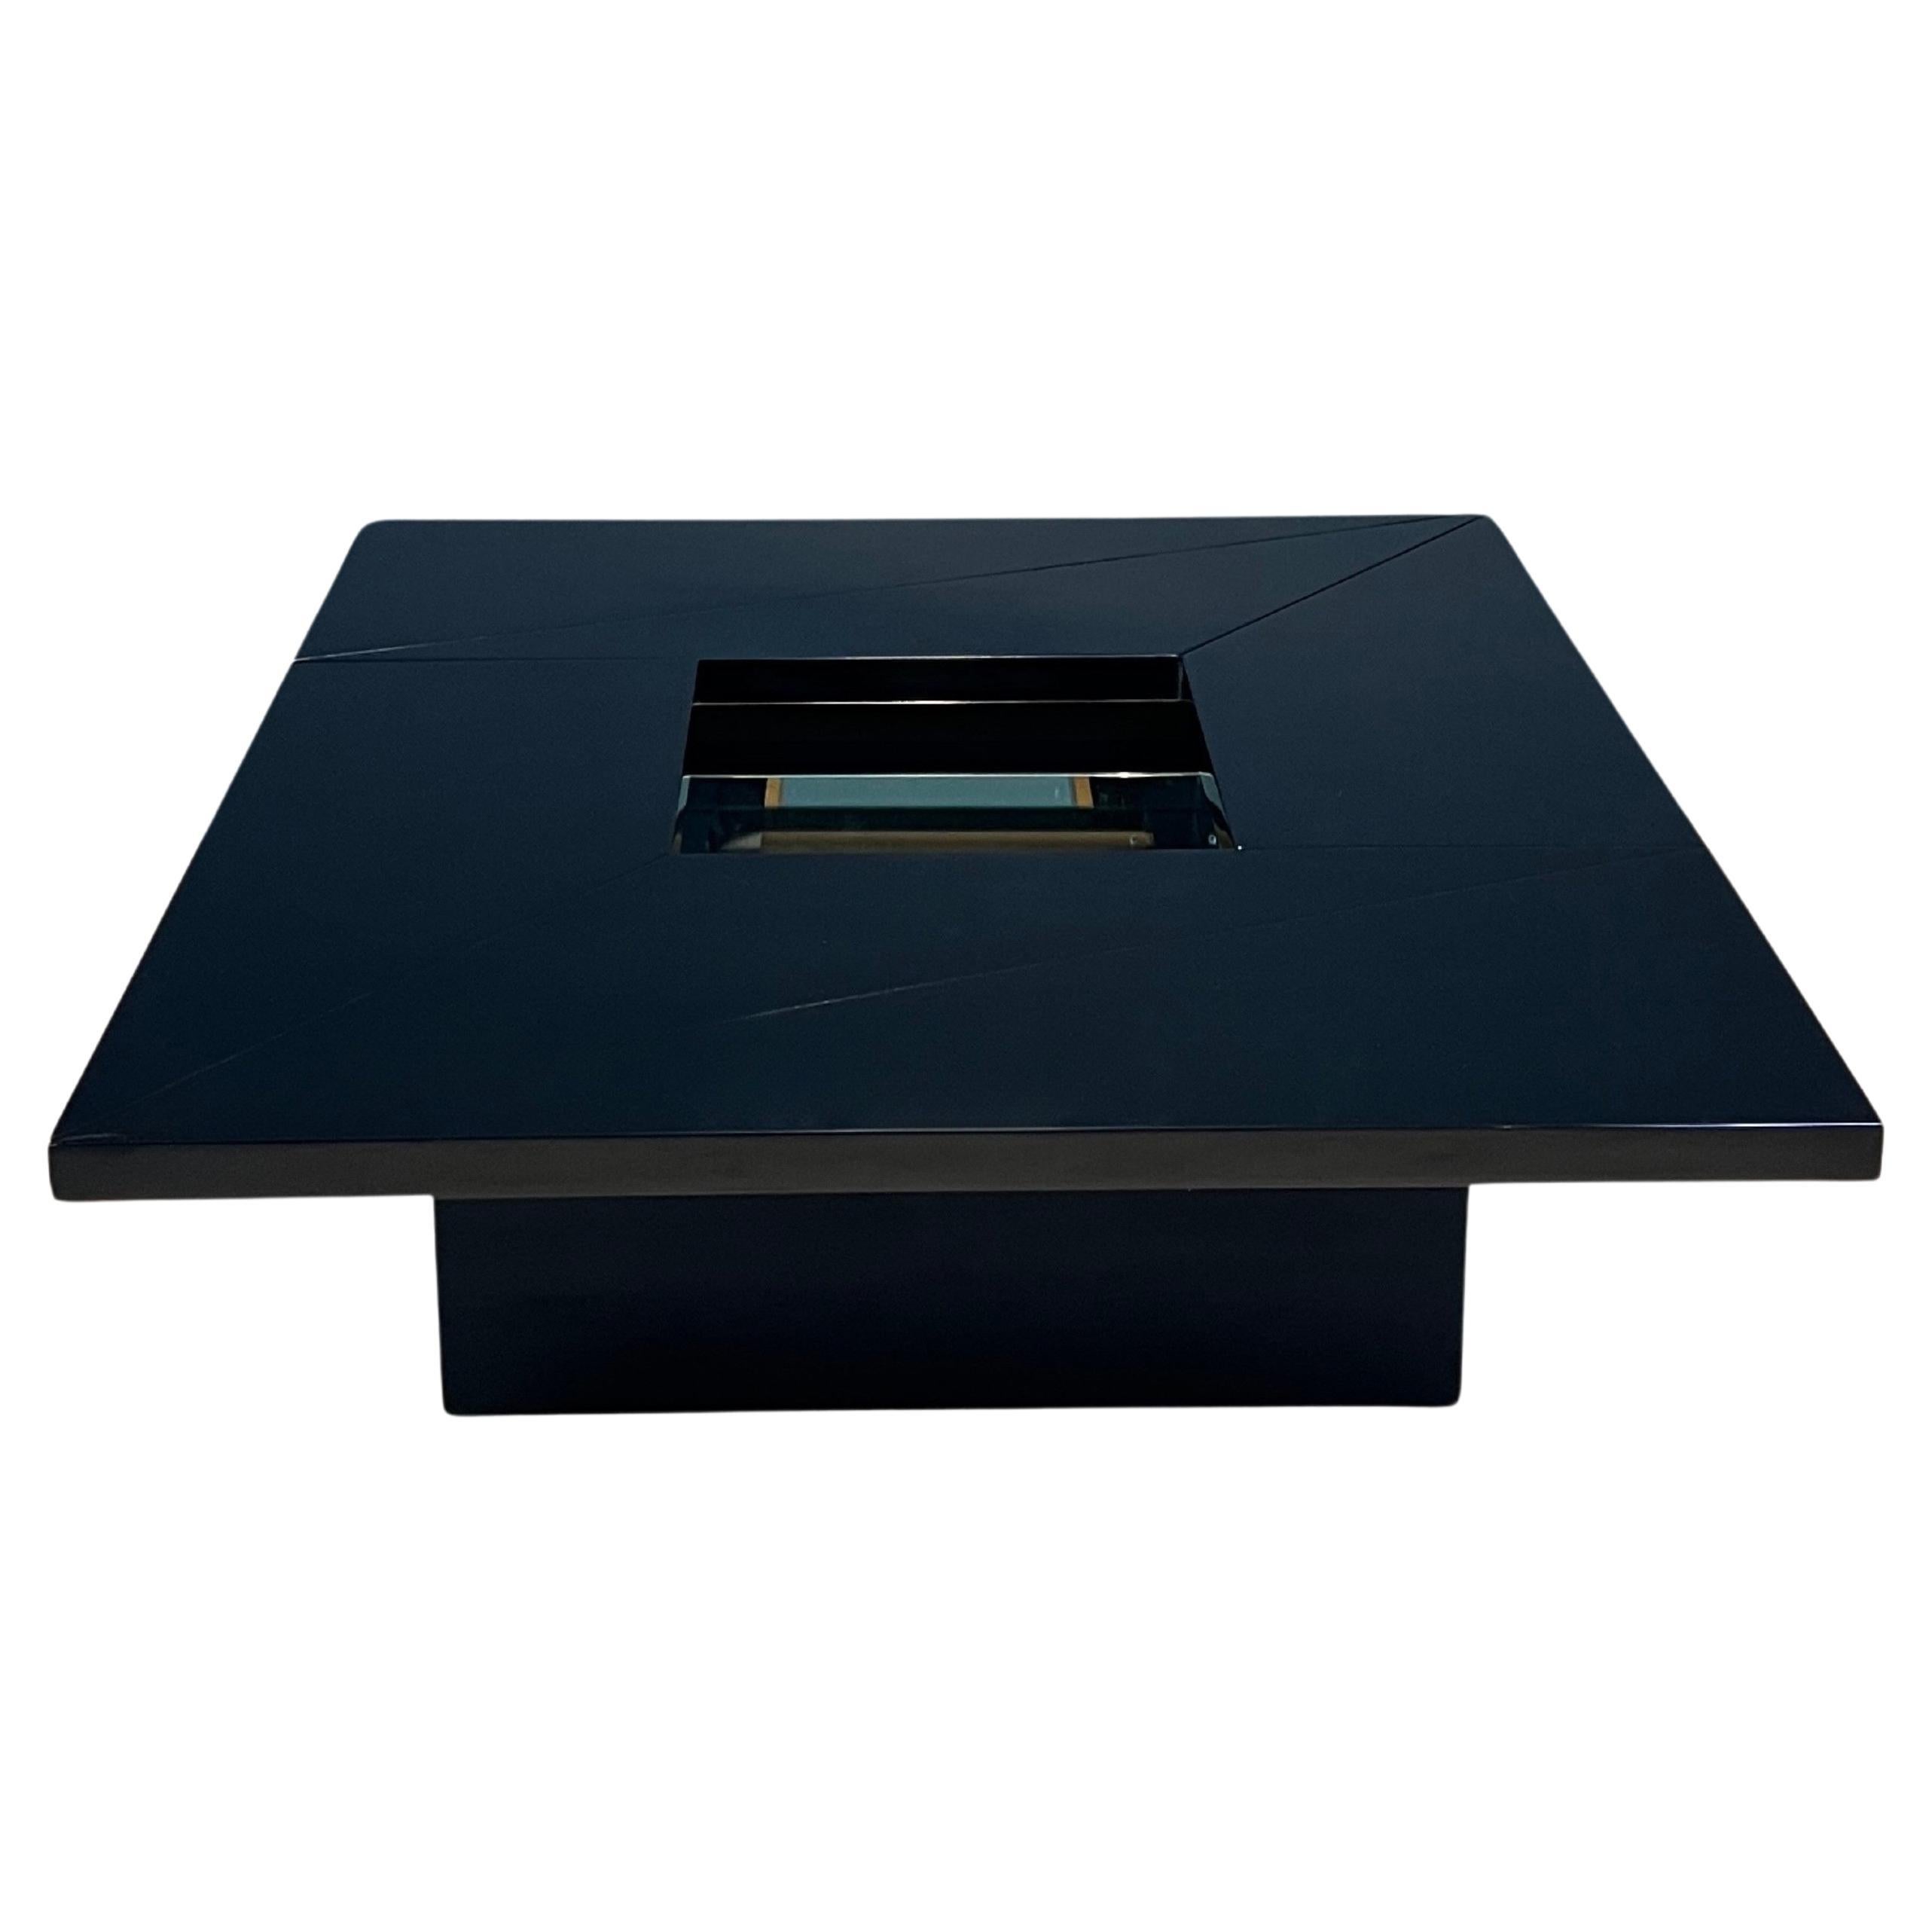 Convertible Coffee Table by Roche Bobois, Black Lacquer, France, 1970s